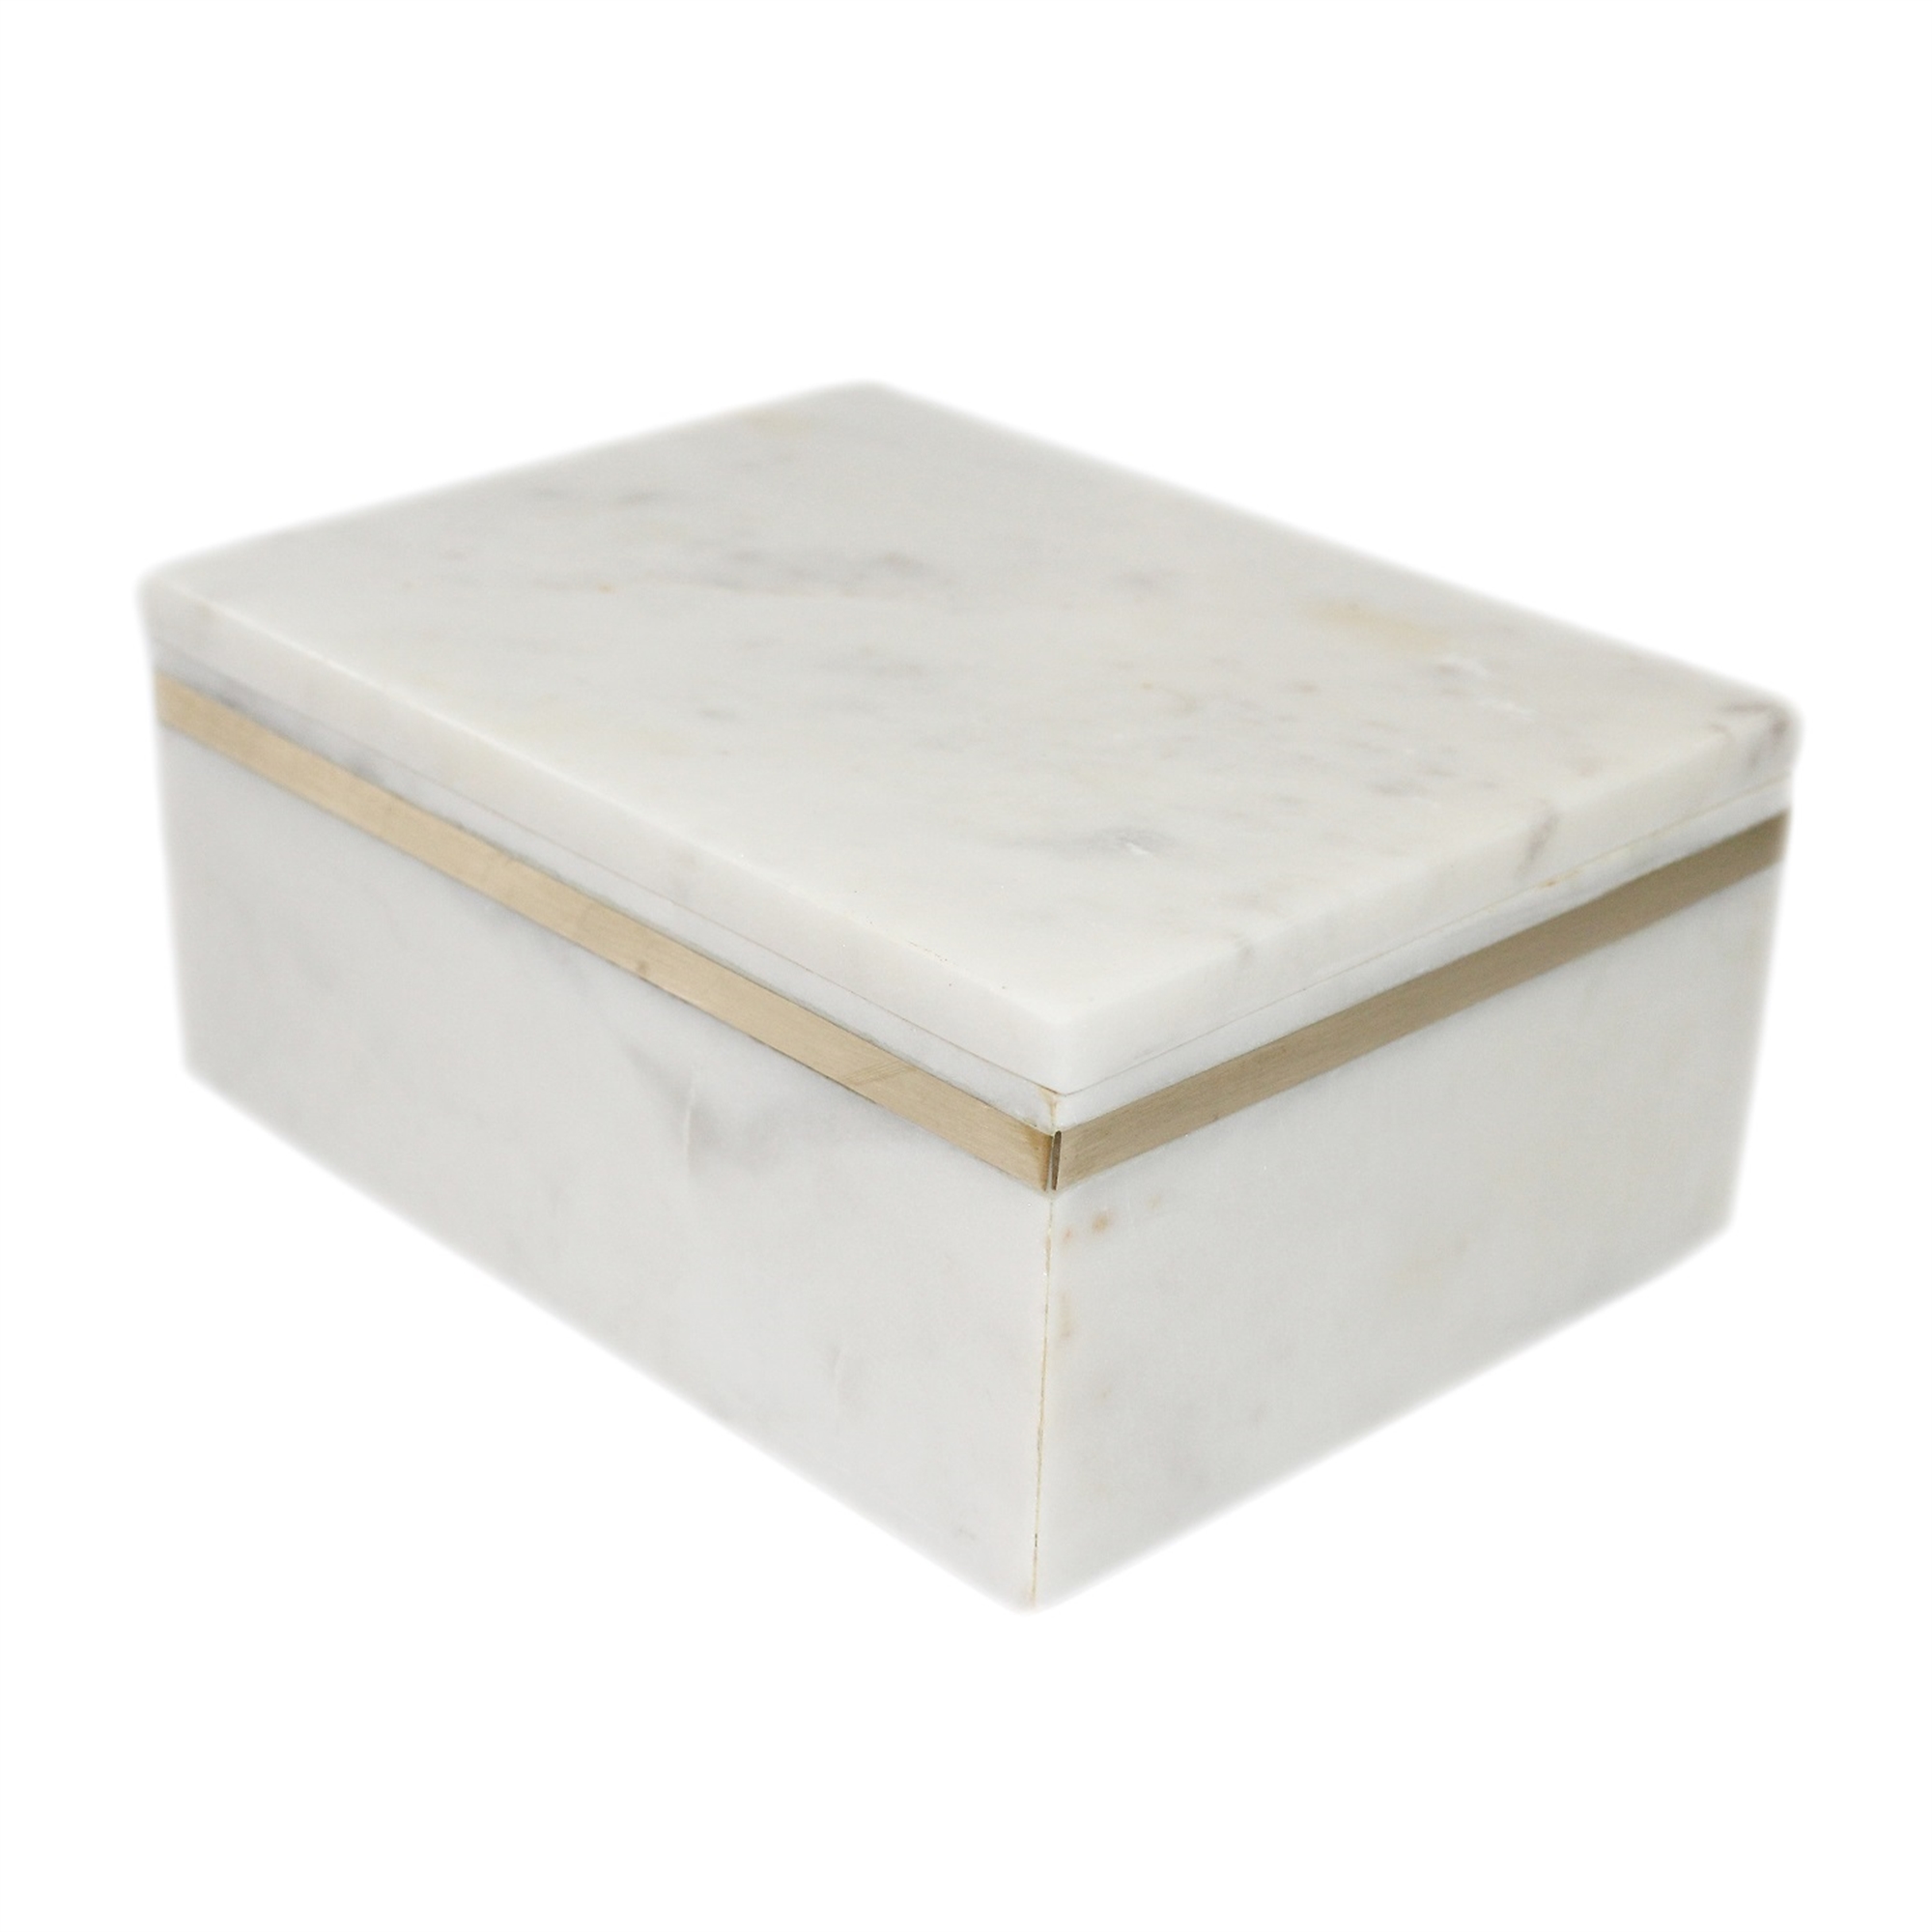 White Marble Boxes with Brass Inlay by BIDKhome - Seven Colonial